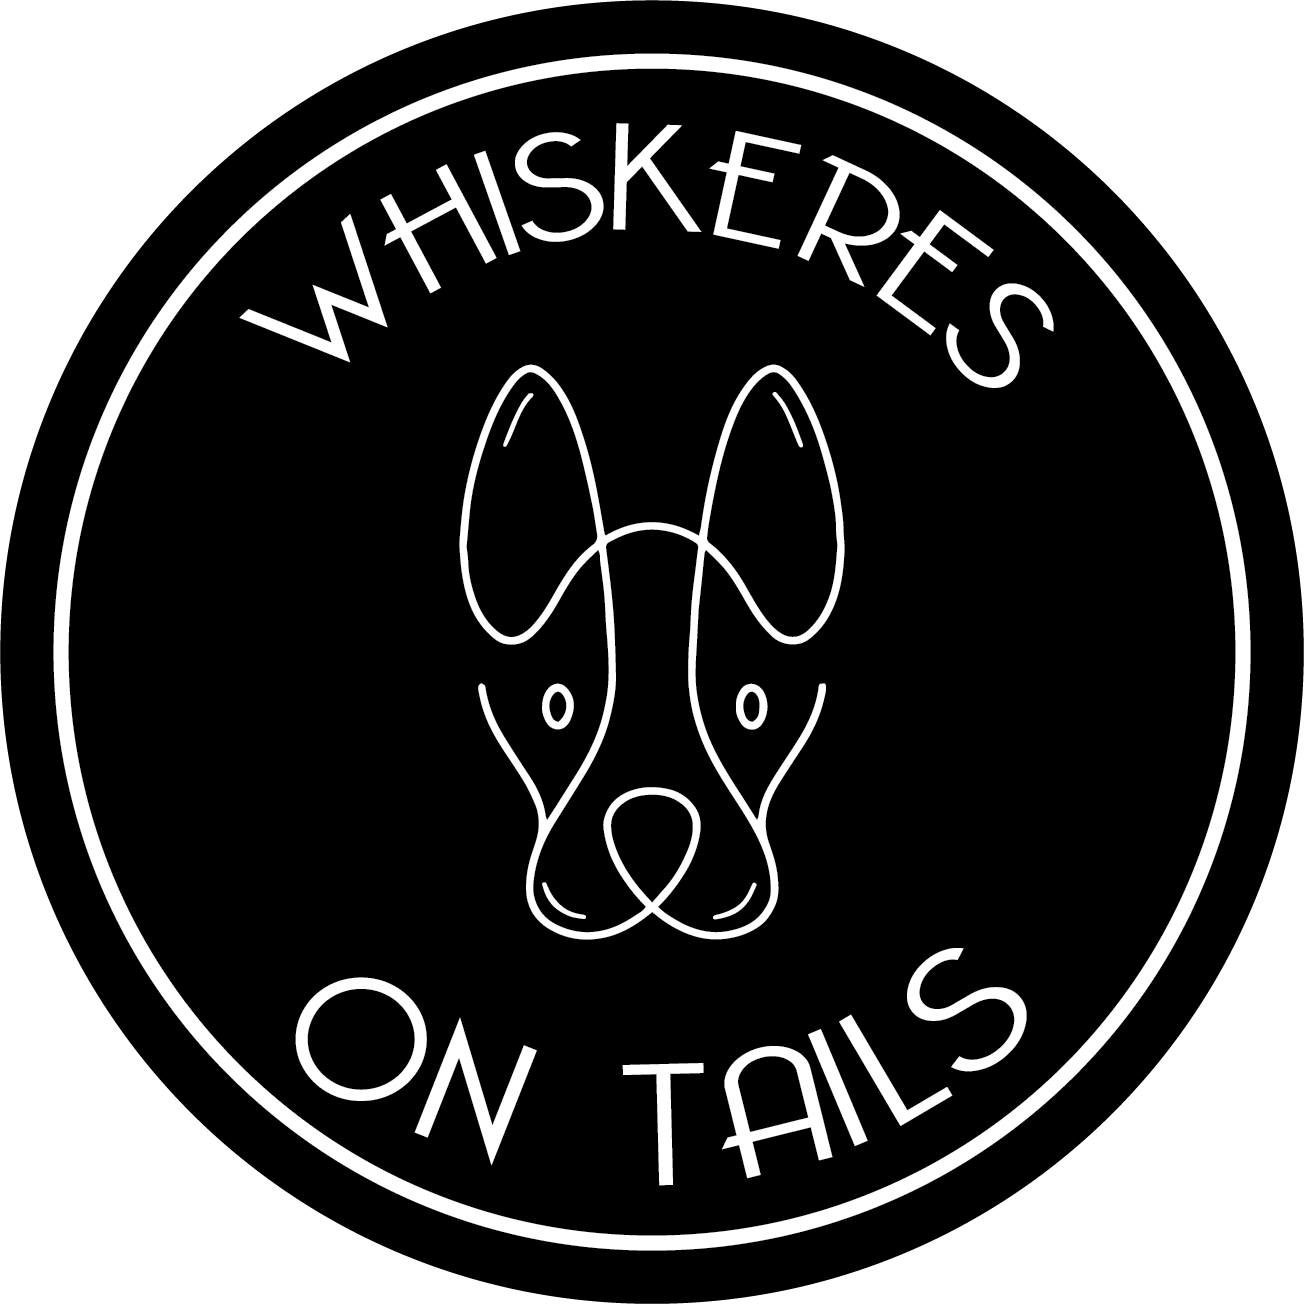 Whiskers On Tails